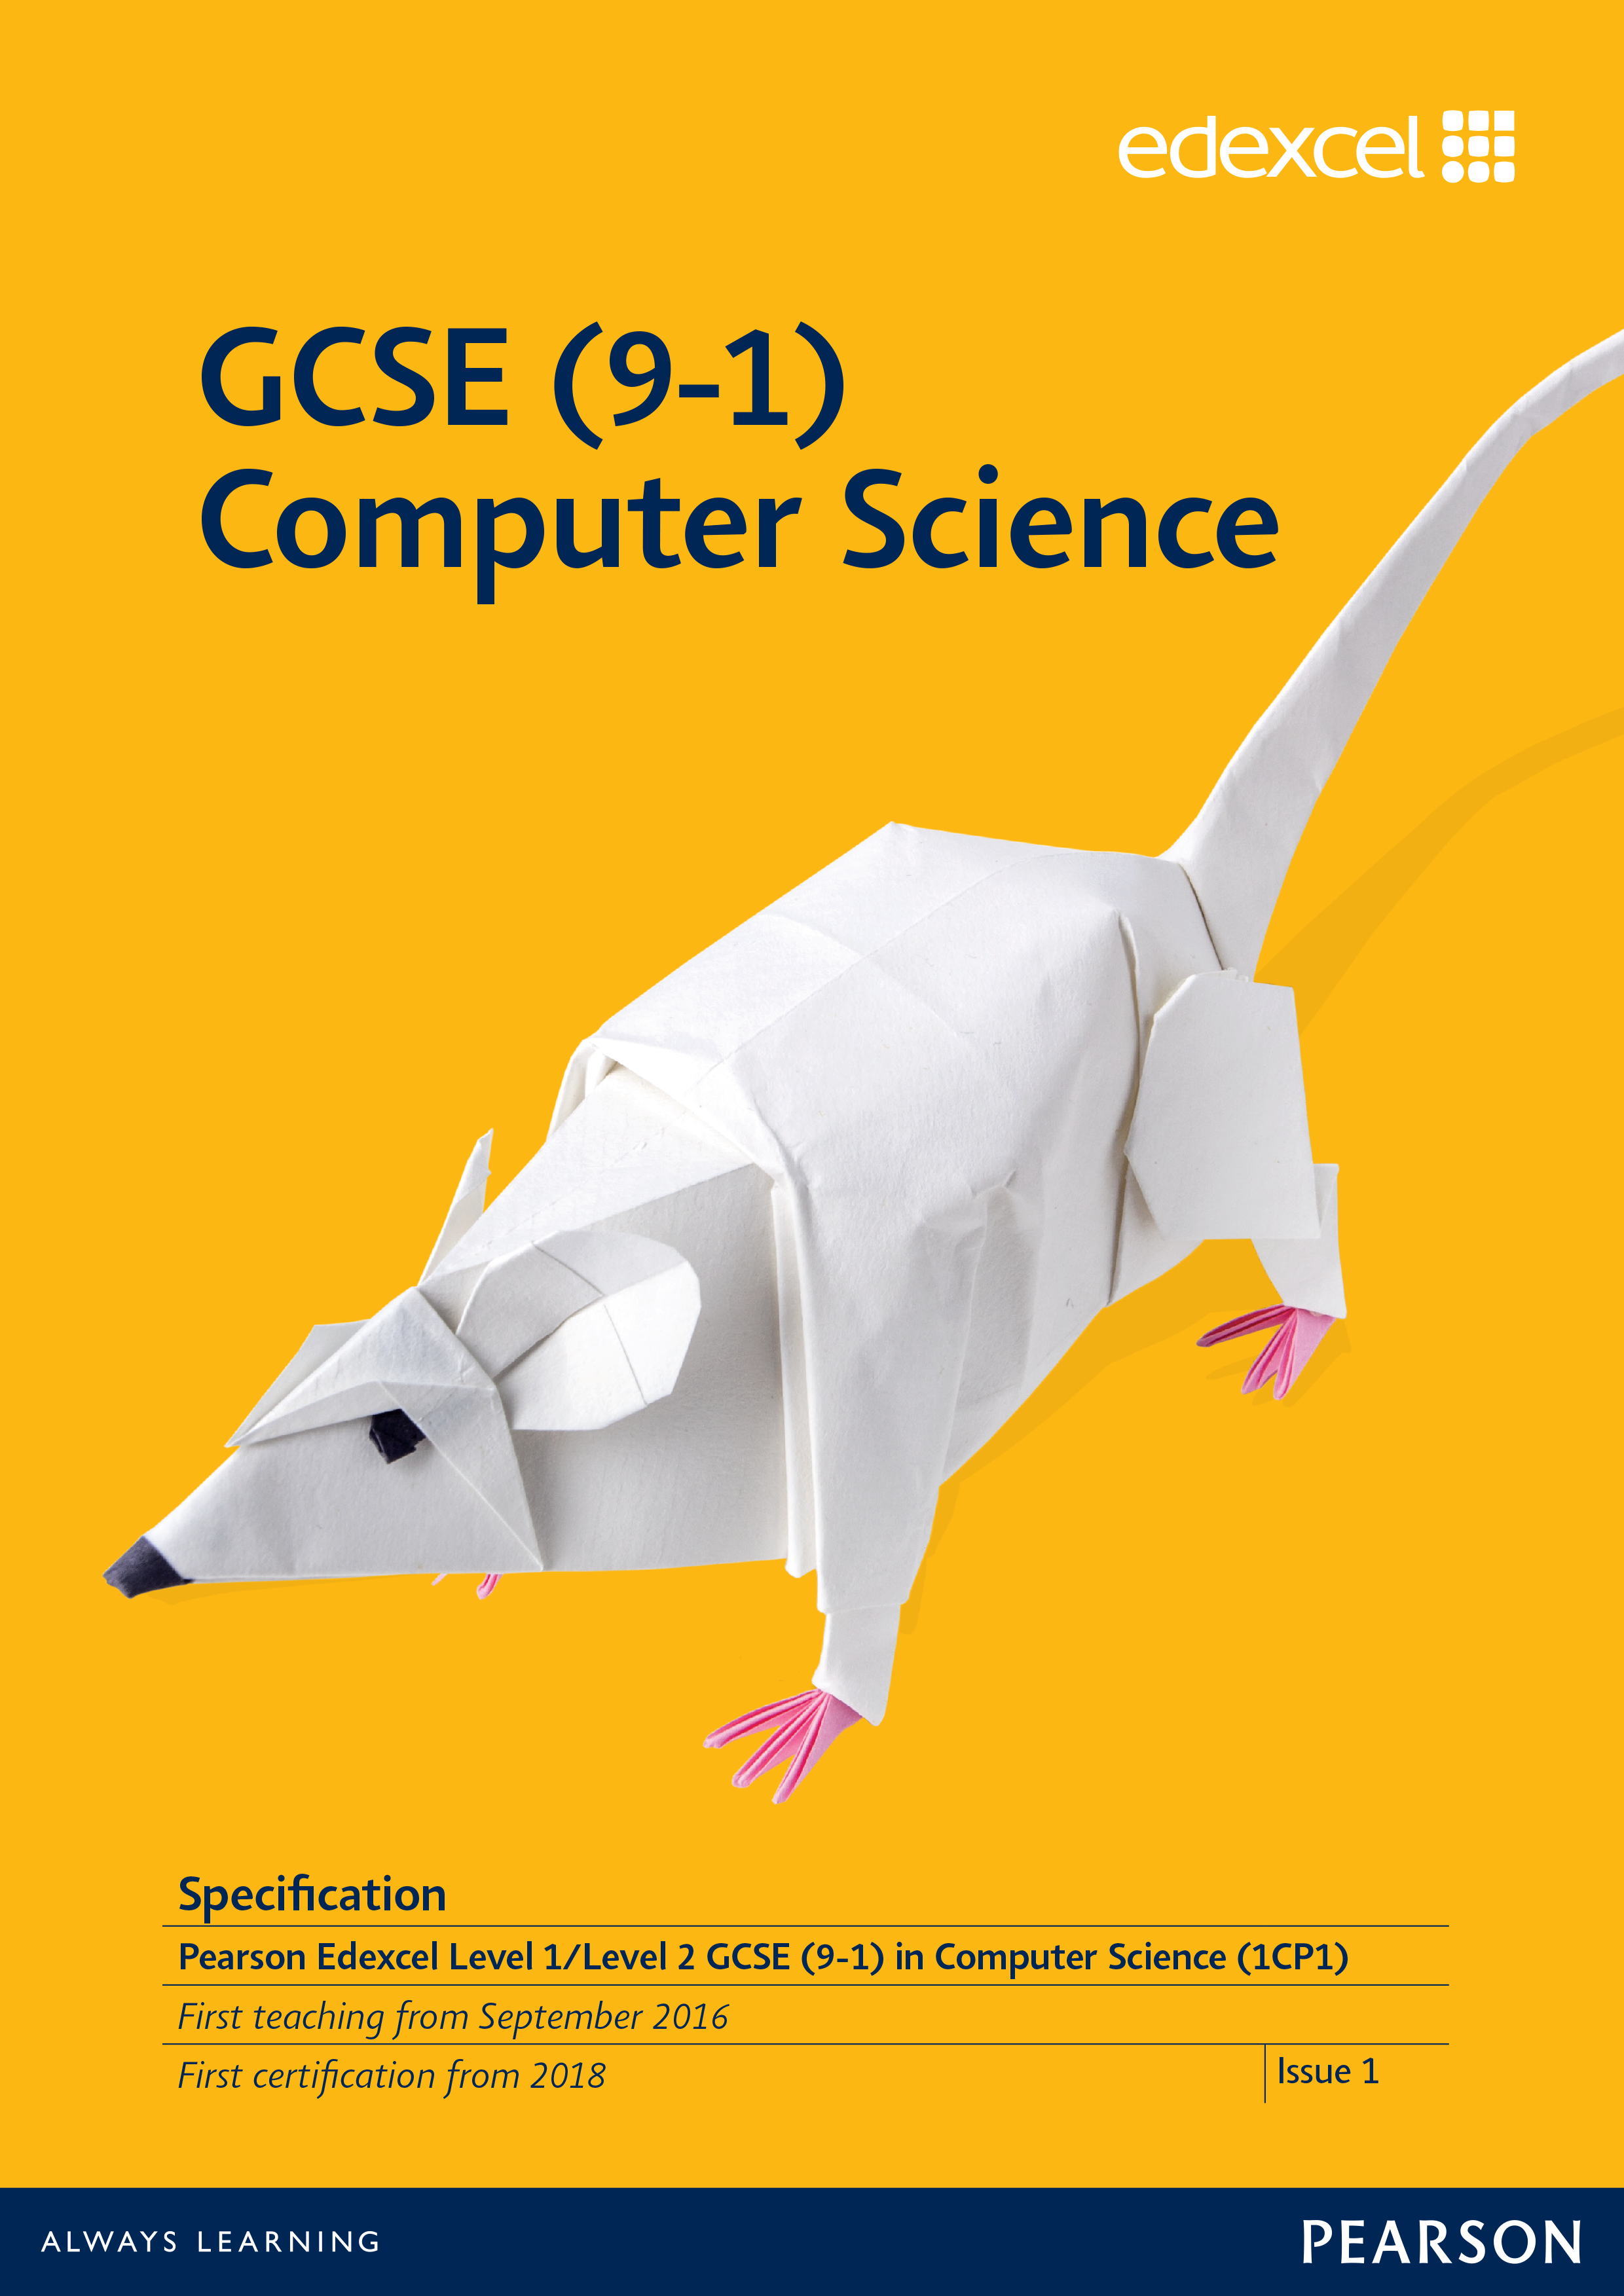 Link to Edexcel GCSE Computer Science (2016) specification page